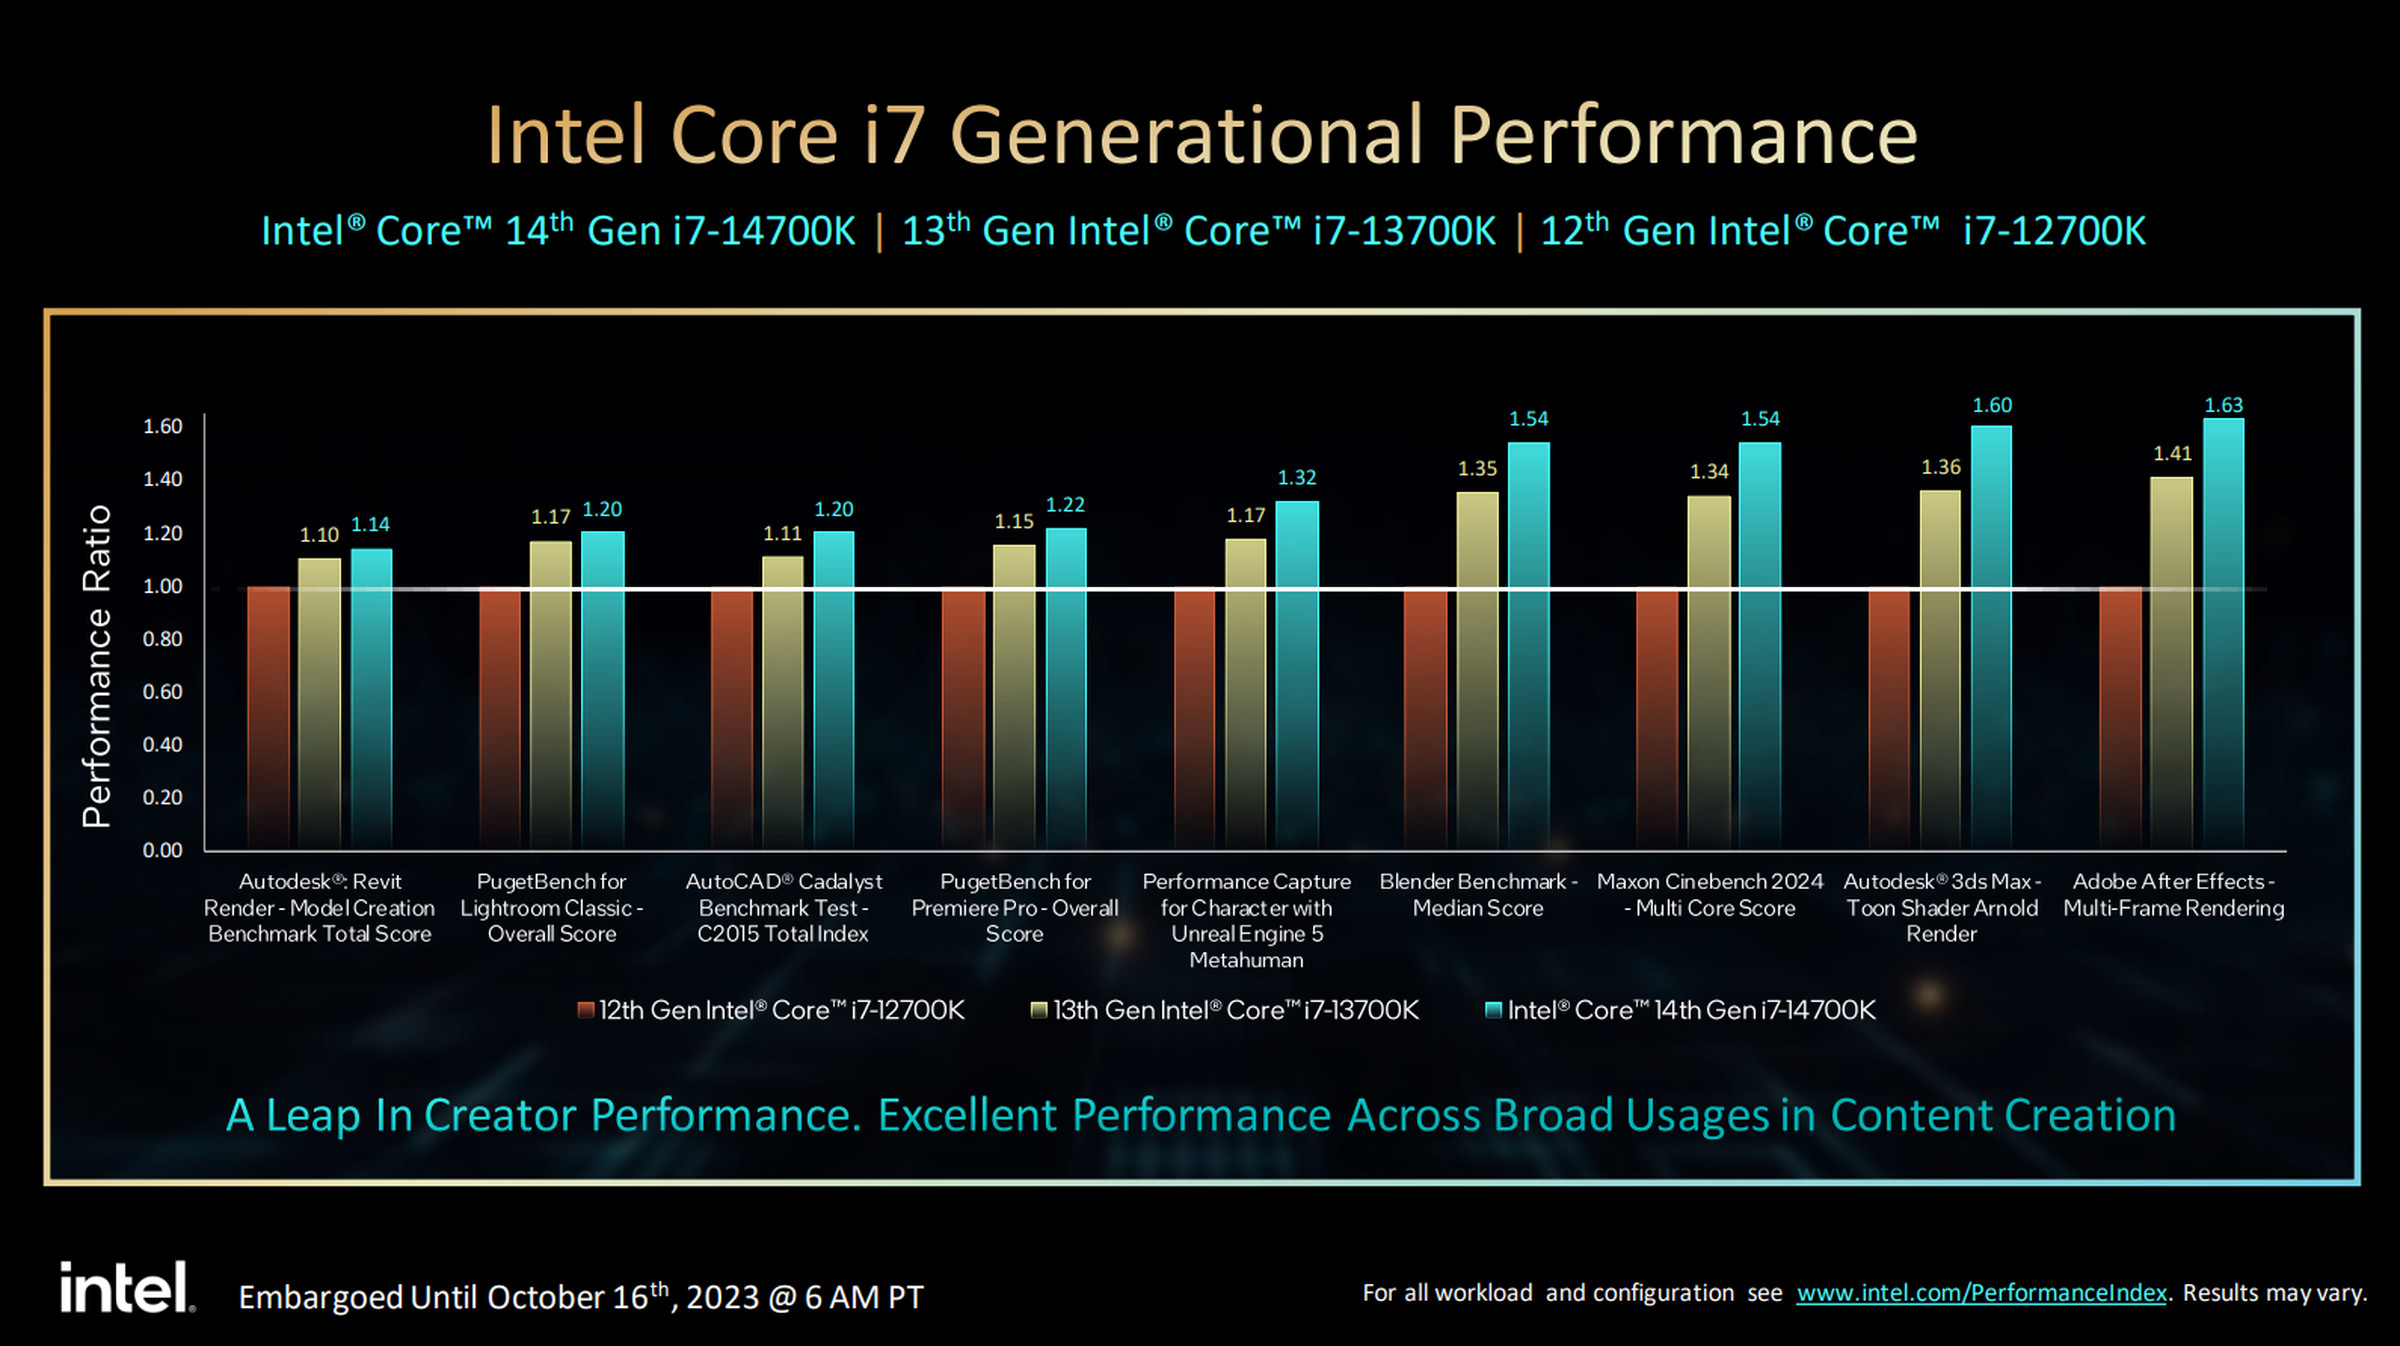 Intel latest 14th Gen Core i7 compared to previous generations.